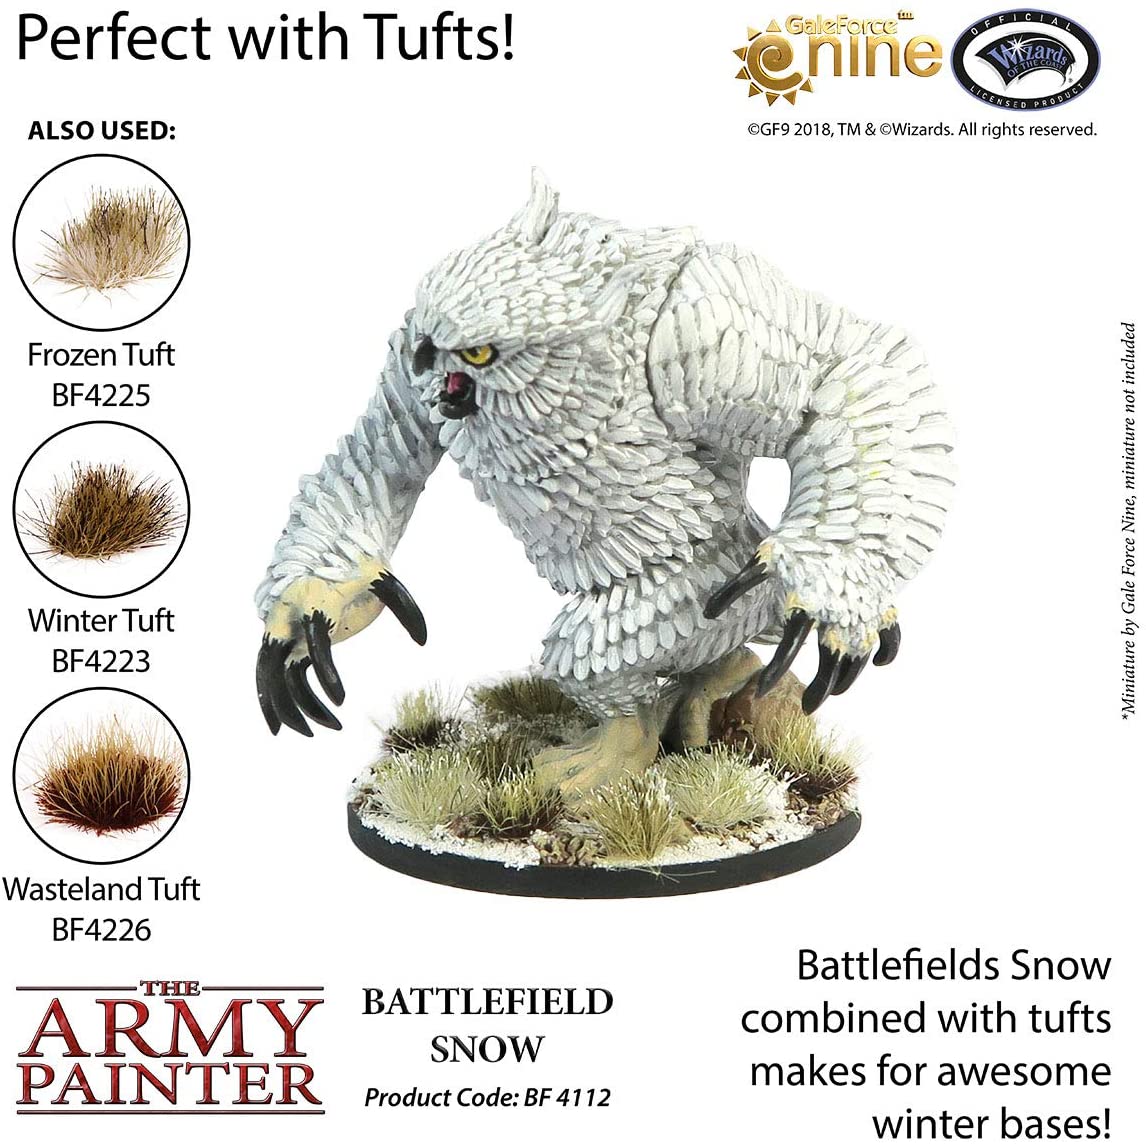 The Army Painter - Battlefield Basing: Snow